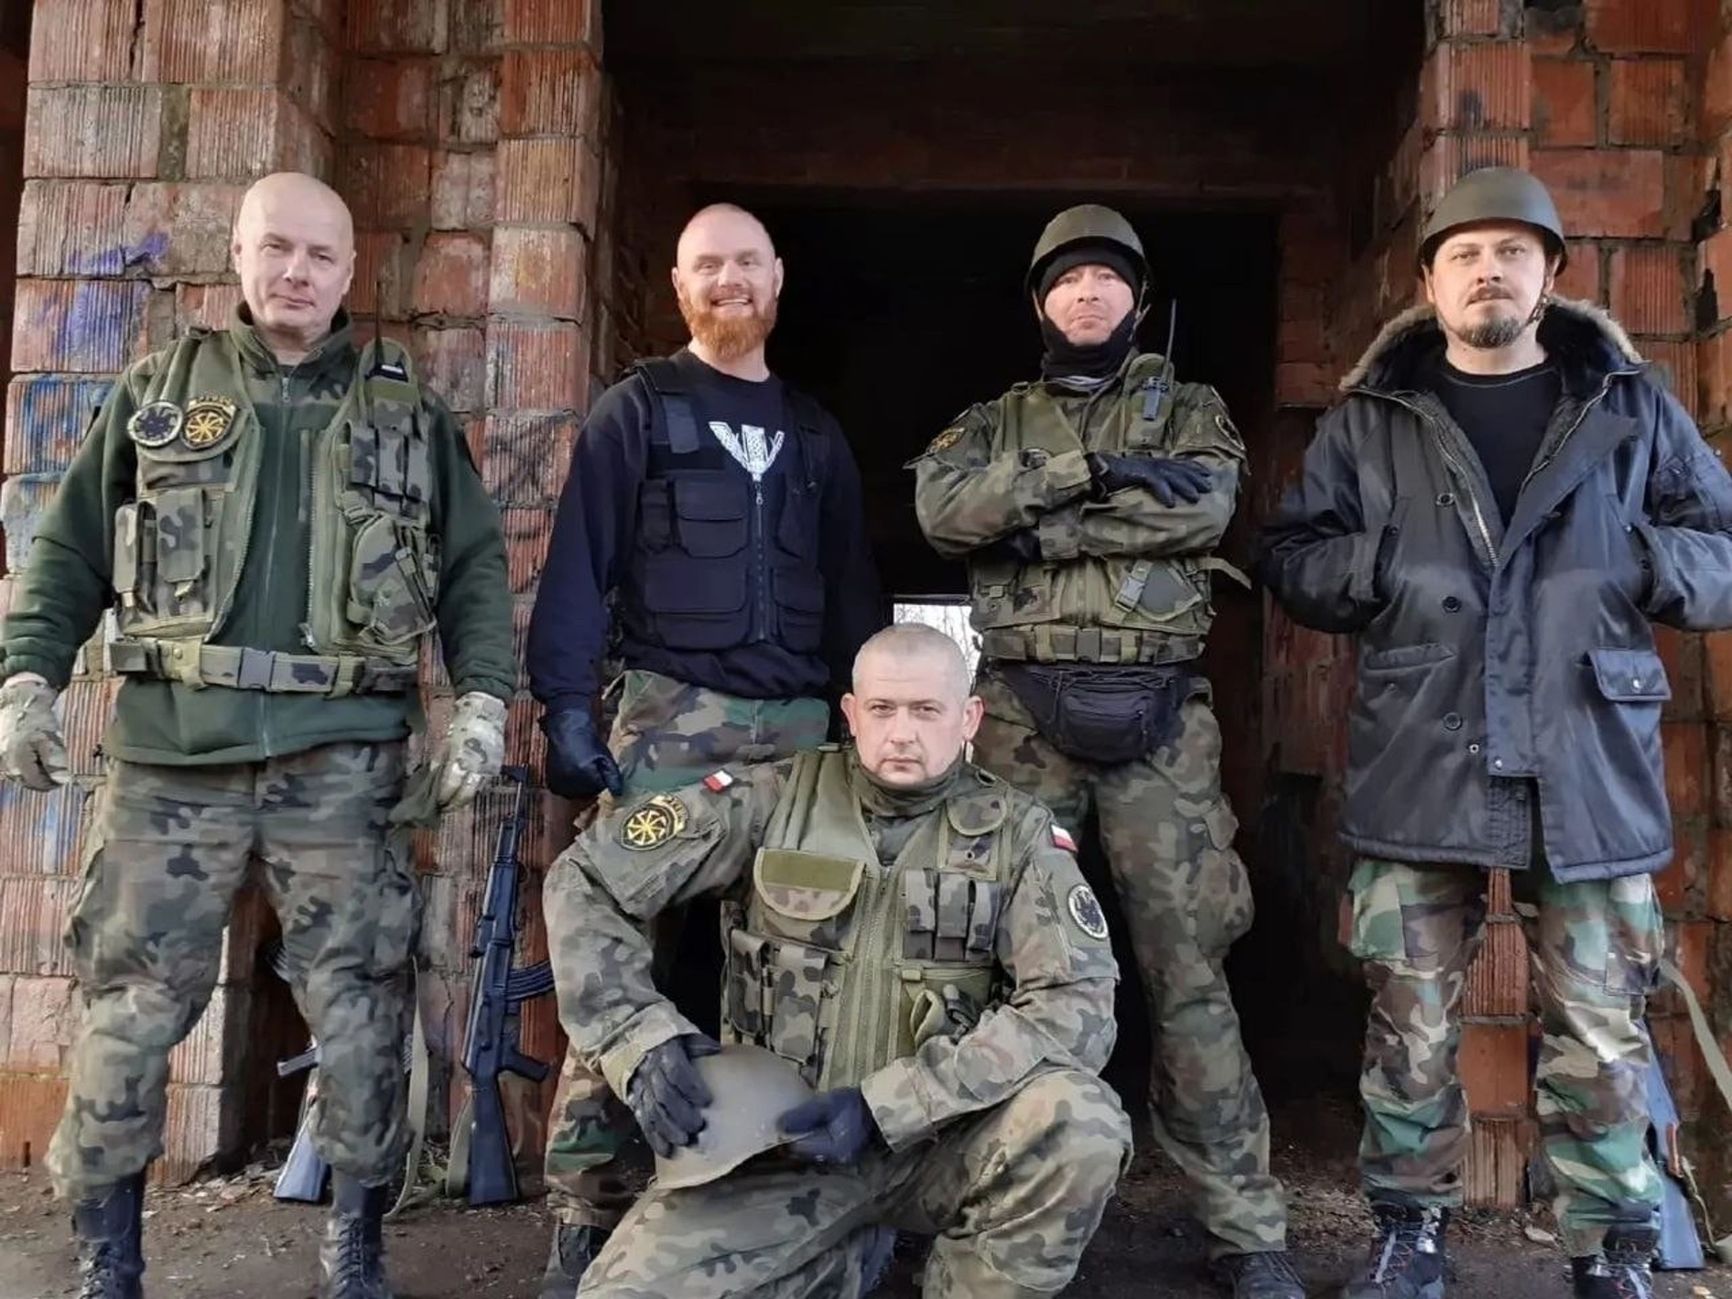 Members of the Polish neo-Nazi organization Zadruga (Fraternal Circle) - leader Artur Czmok (on the left) and former police officer Arvid Ploczewsky (below). For example, in this video, a fighter from the Rusich group and Yan Petrovsky (in the second row) send greetings to their Polish brothers, especially those from Krakow, from a seized building in Ukraine